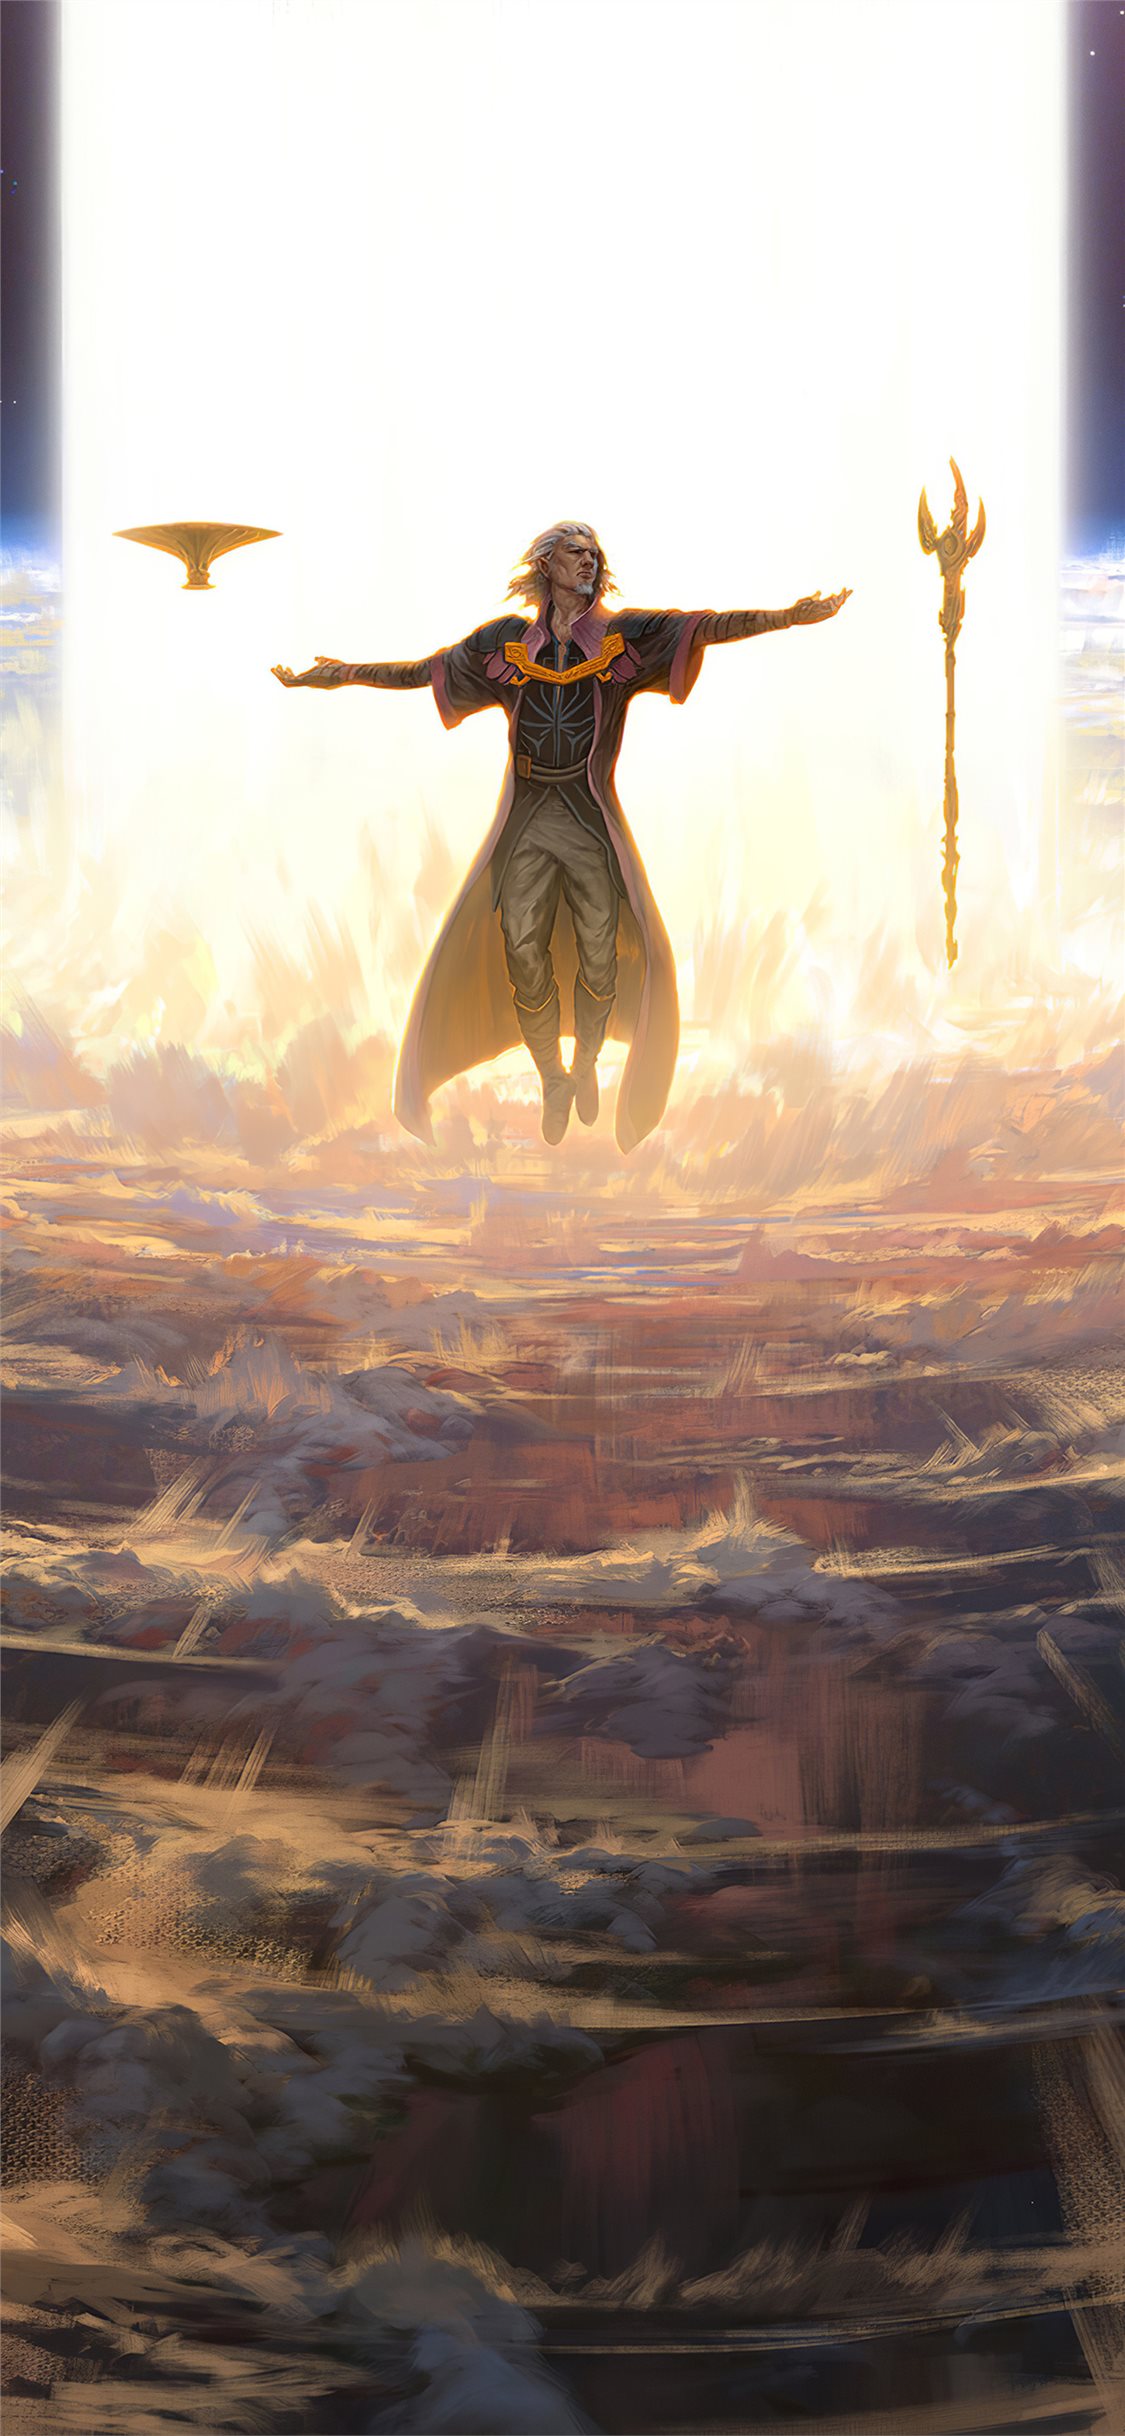 Mtg Iphone Wallpapers